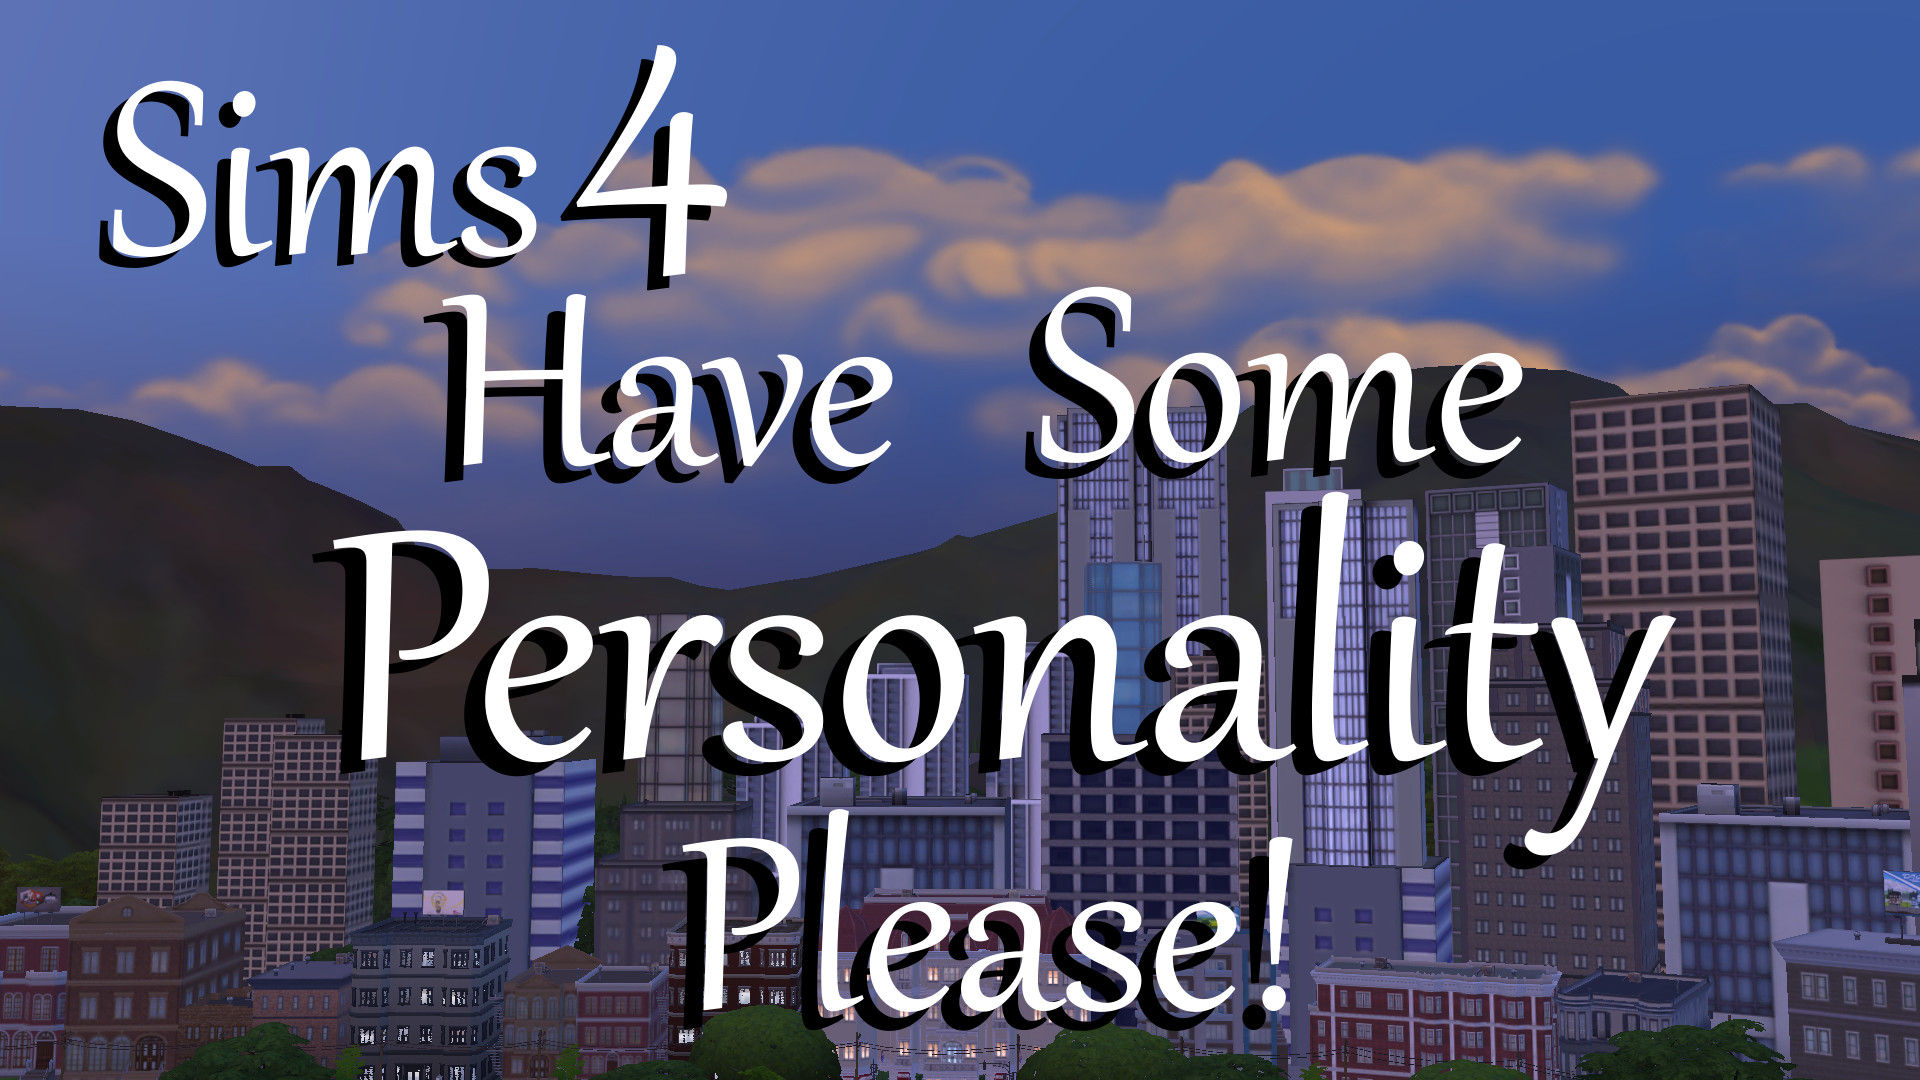 Have Some Personality Please! by PolarBearSims